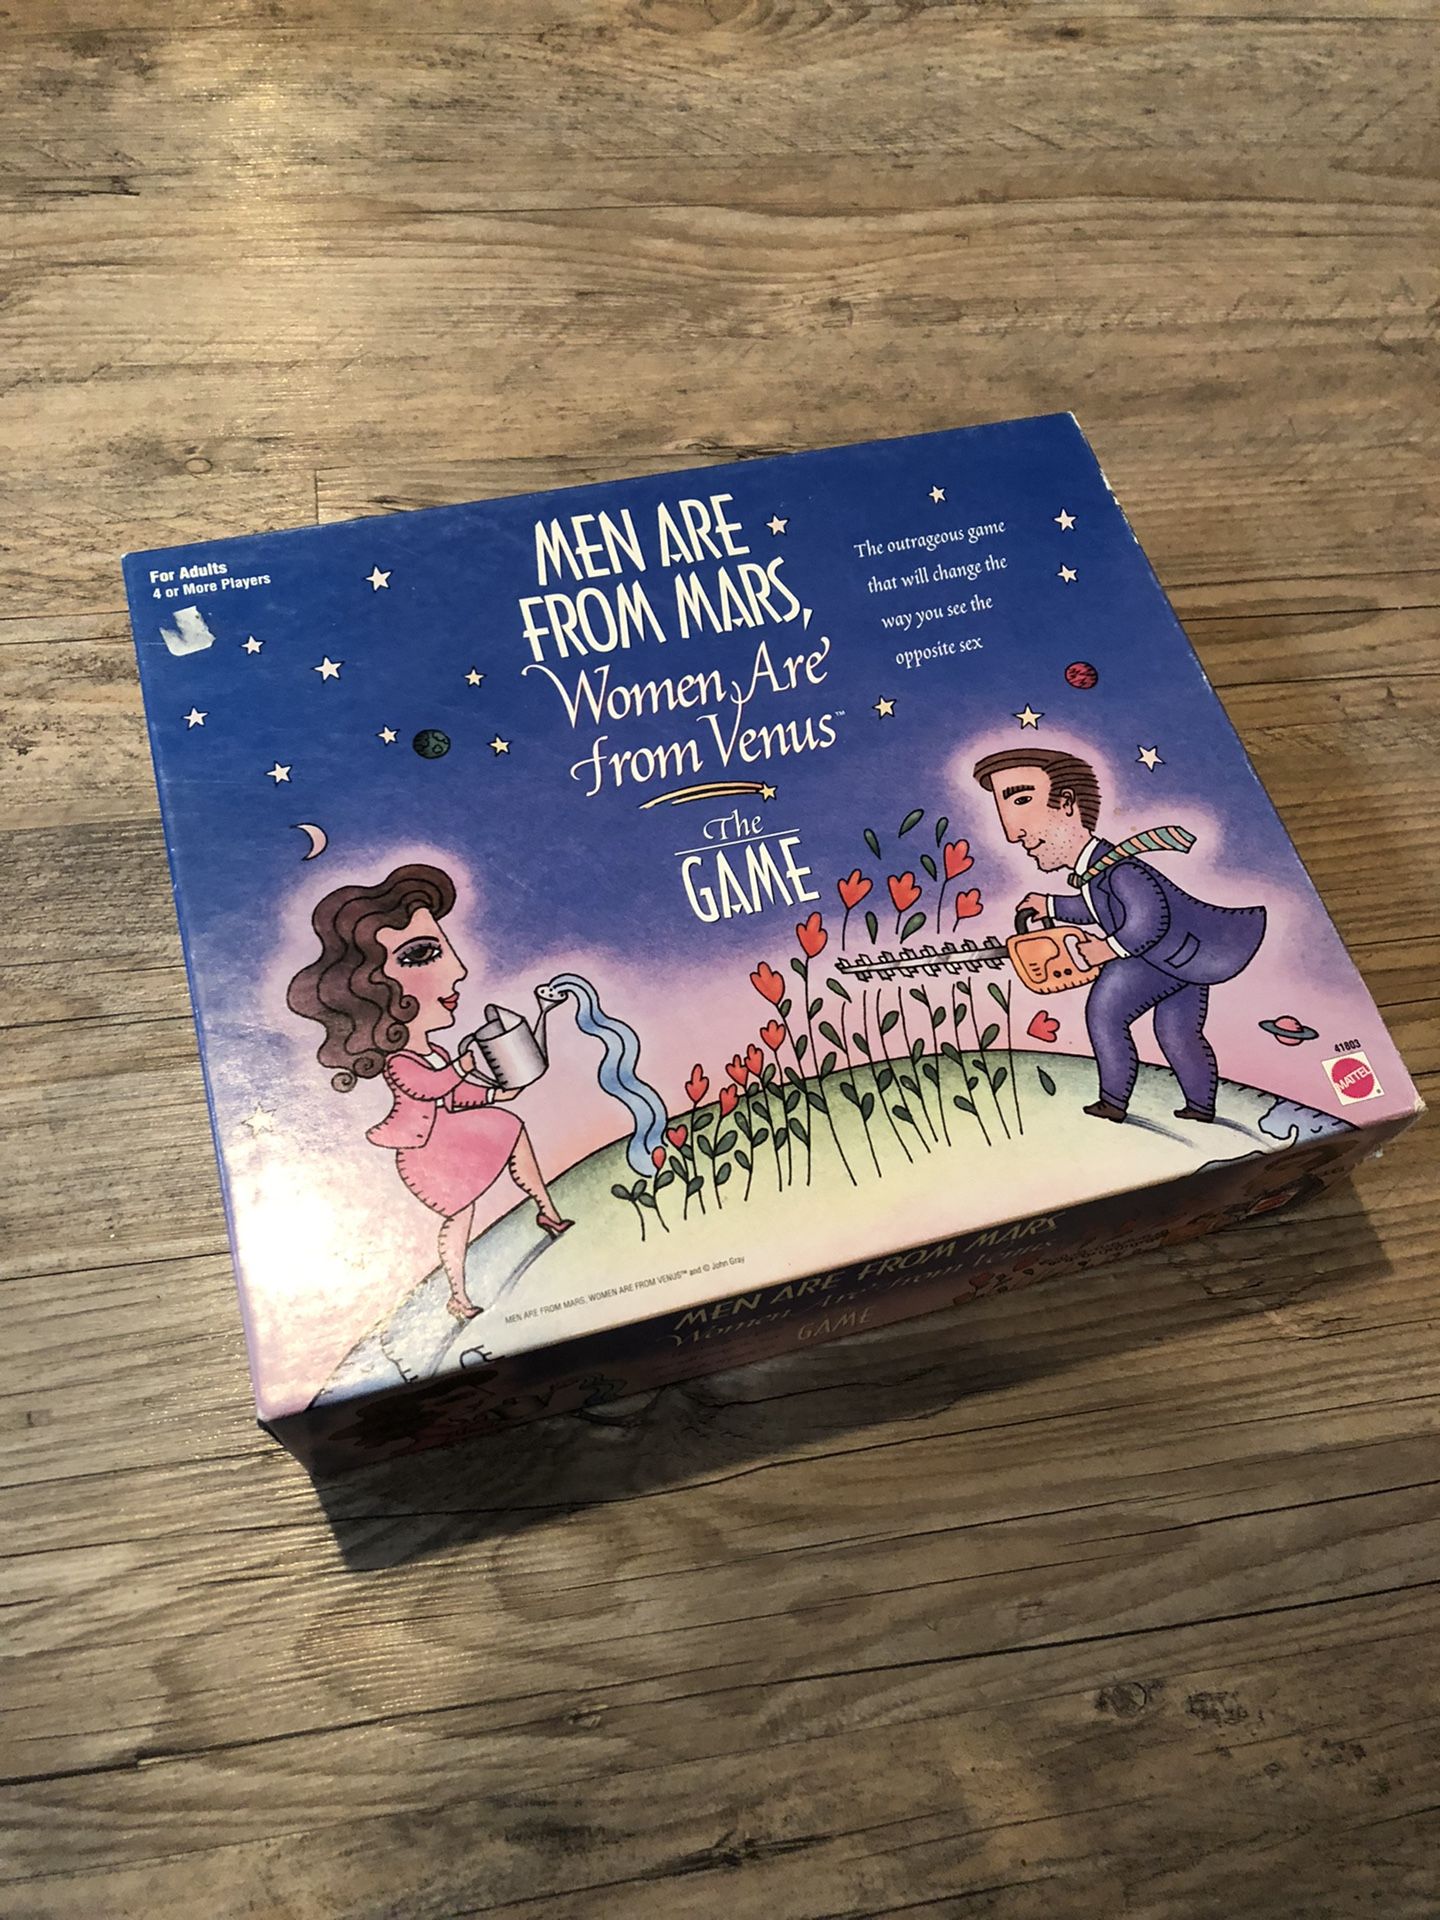 GREAT MEN ARE FROM MARS WOMEN ARE FROM VENUS ADULT BOARD GAME HILARIOUS FUN!